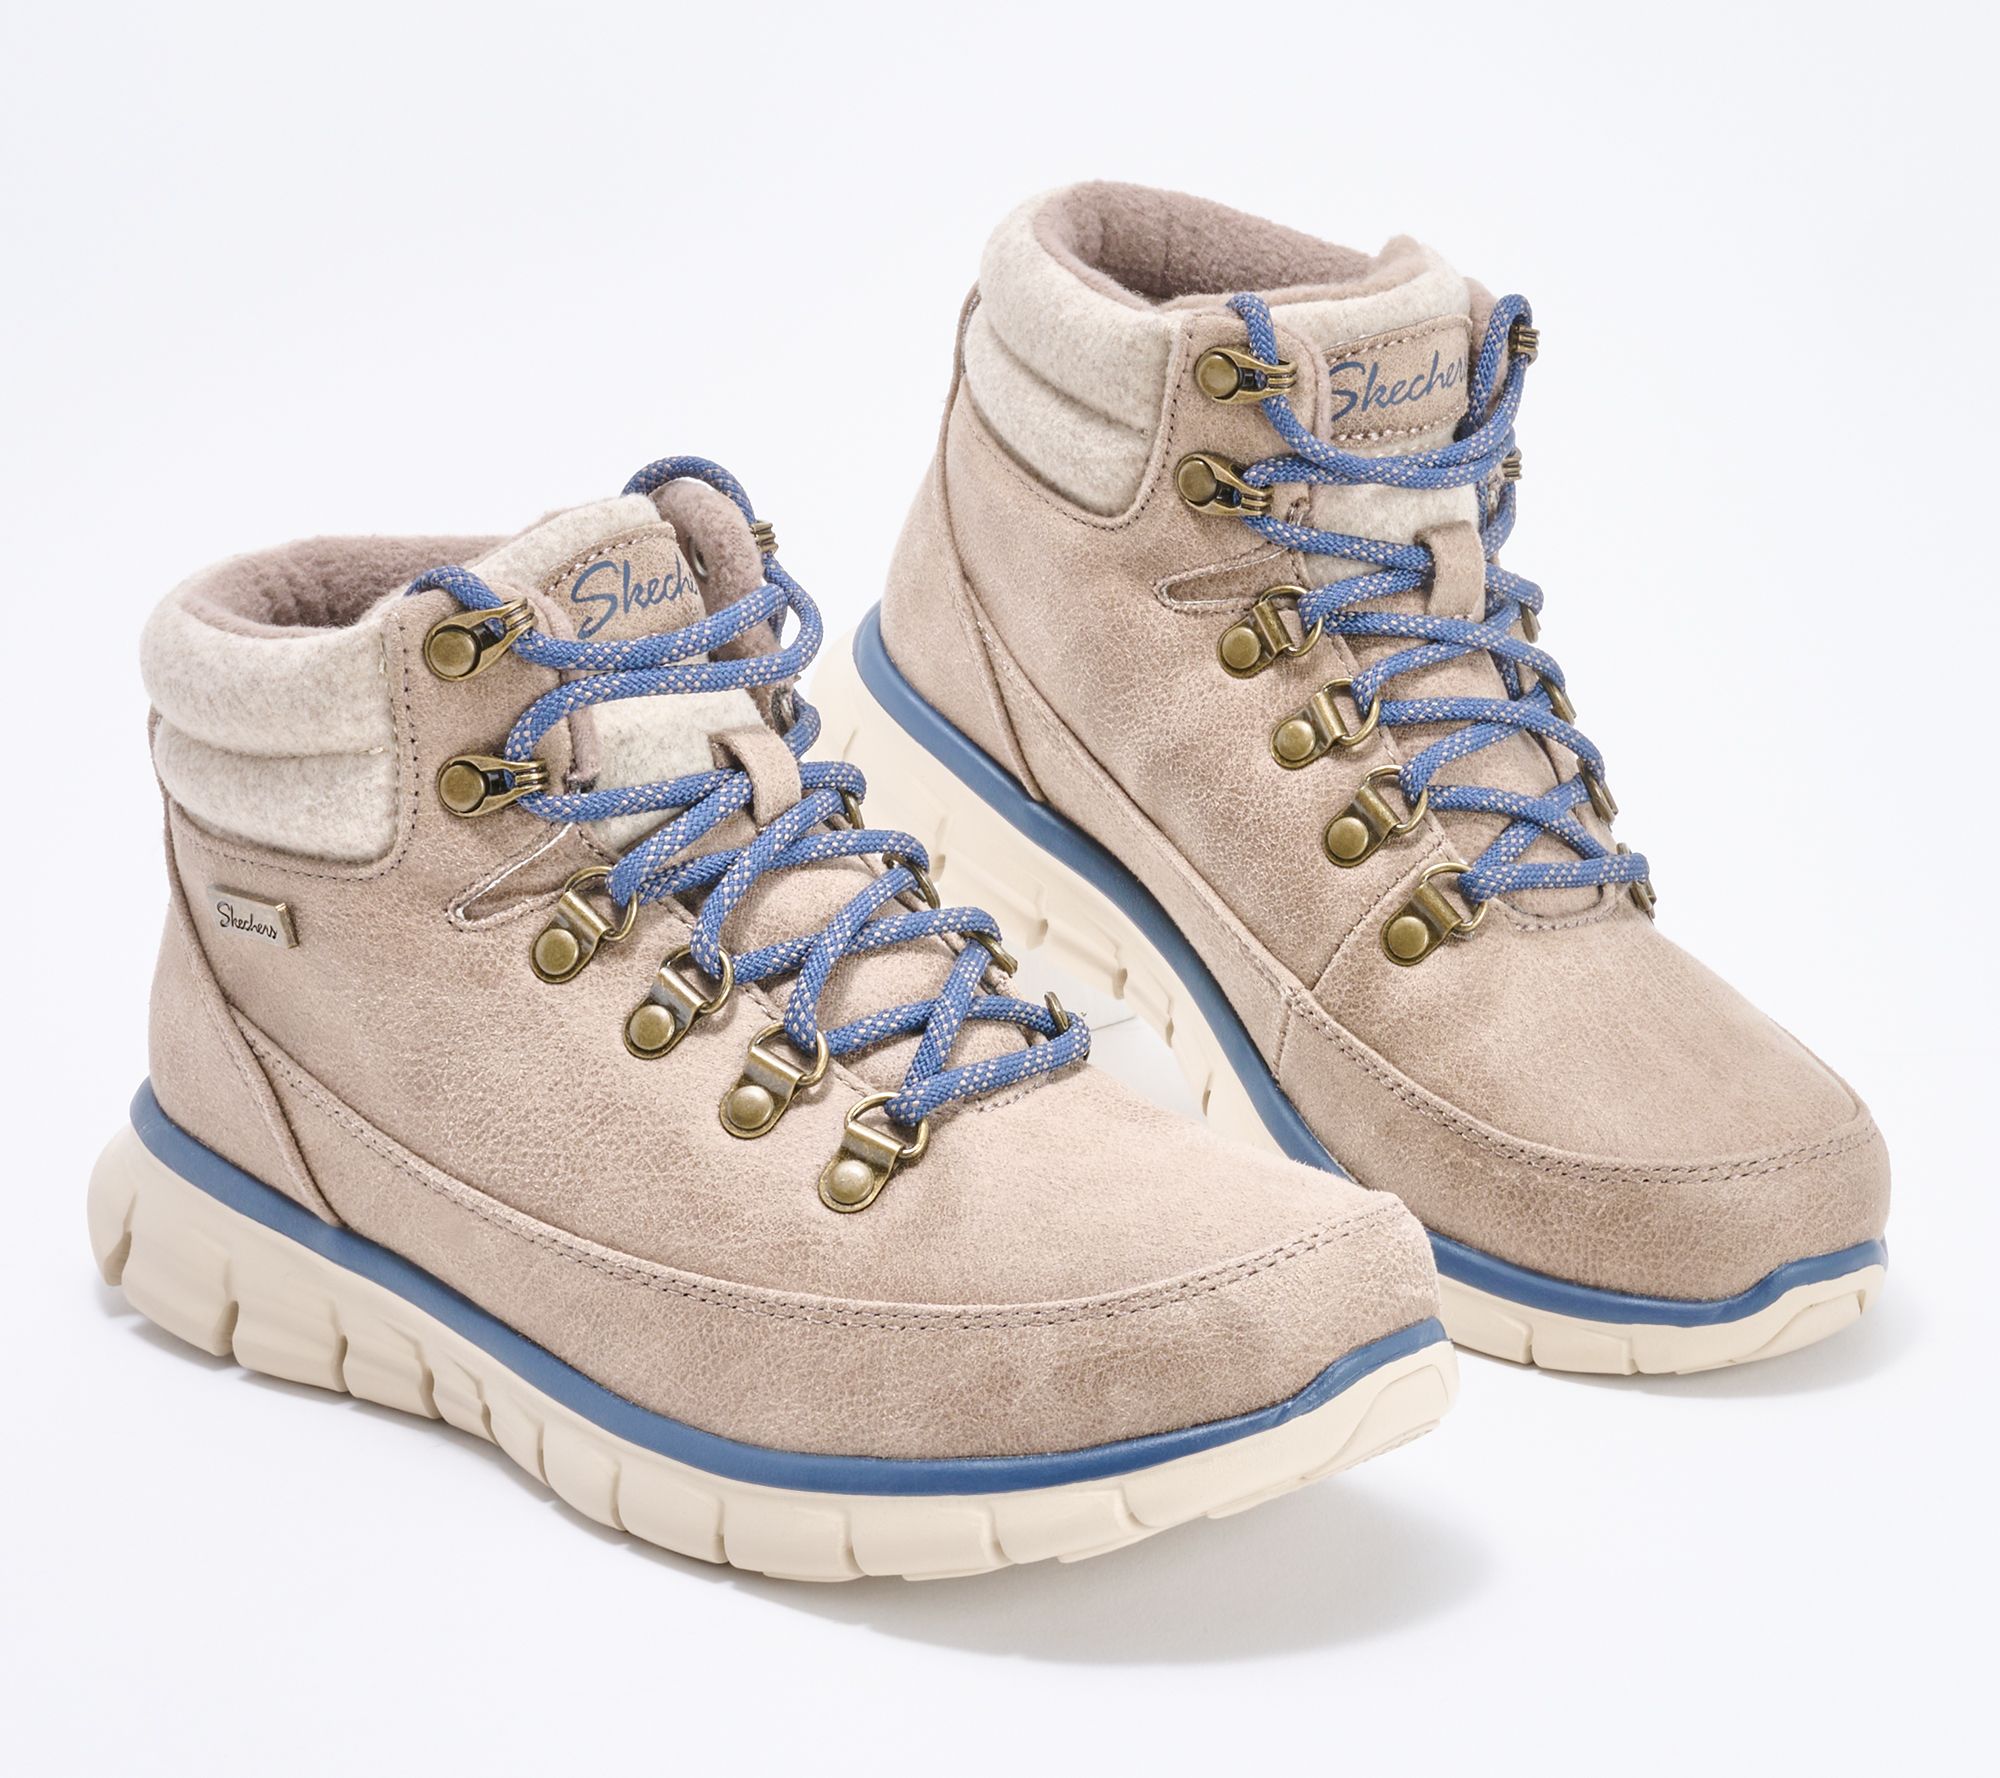 Skechers Synergy Water Repellent Hiker Boots - Seeker QVC.com